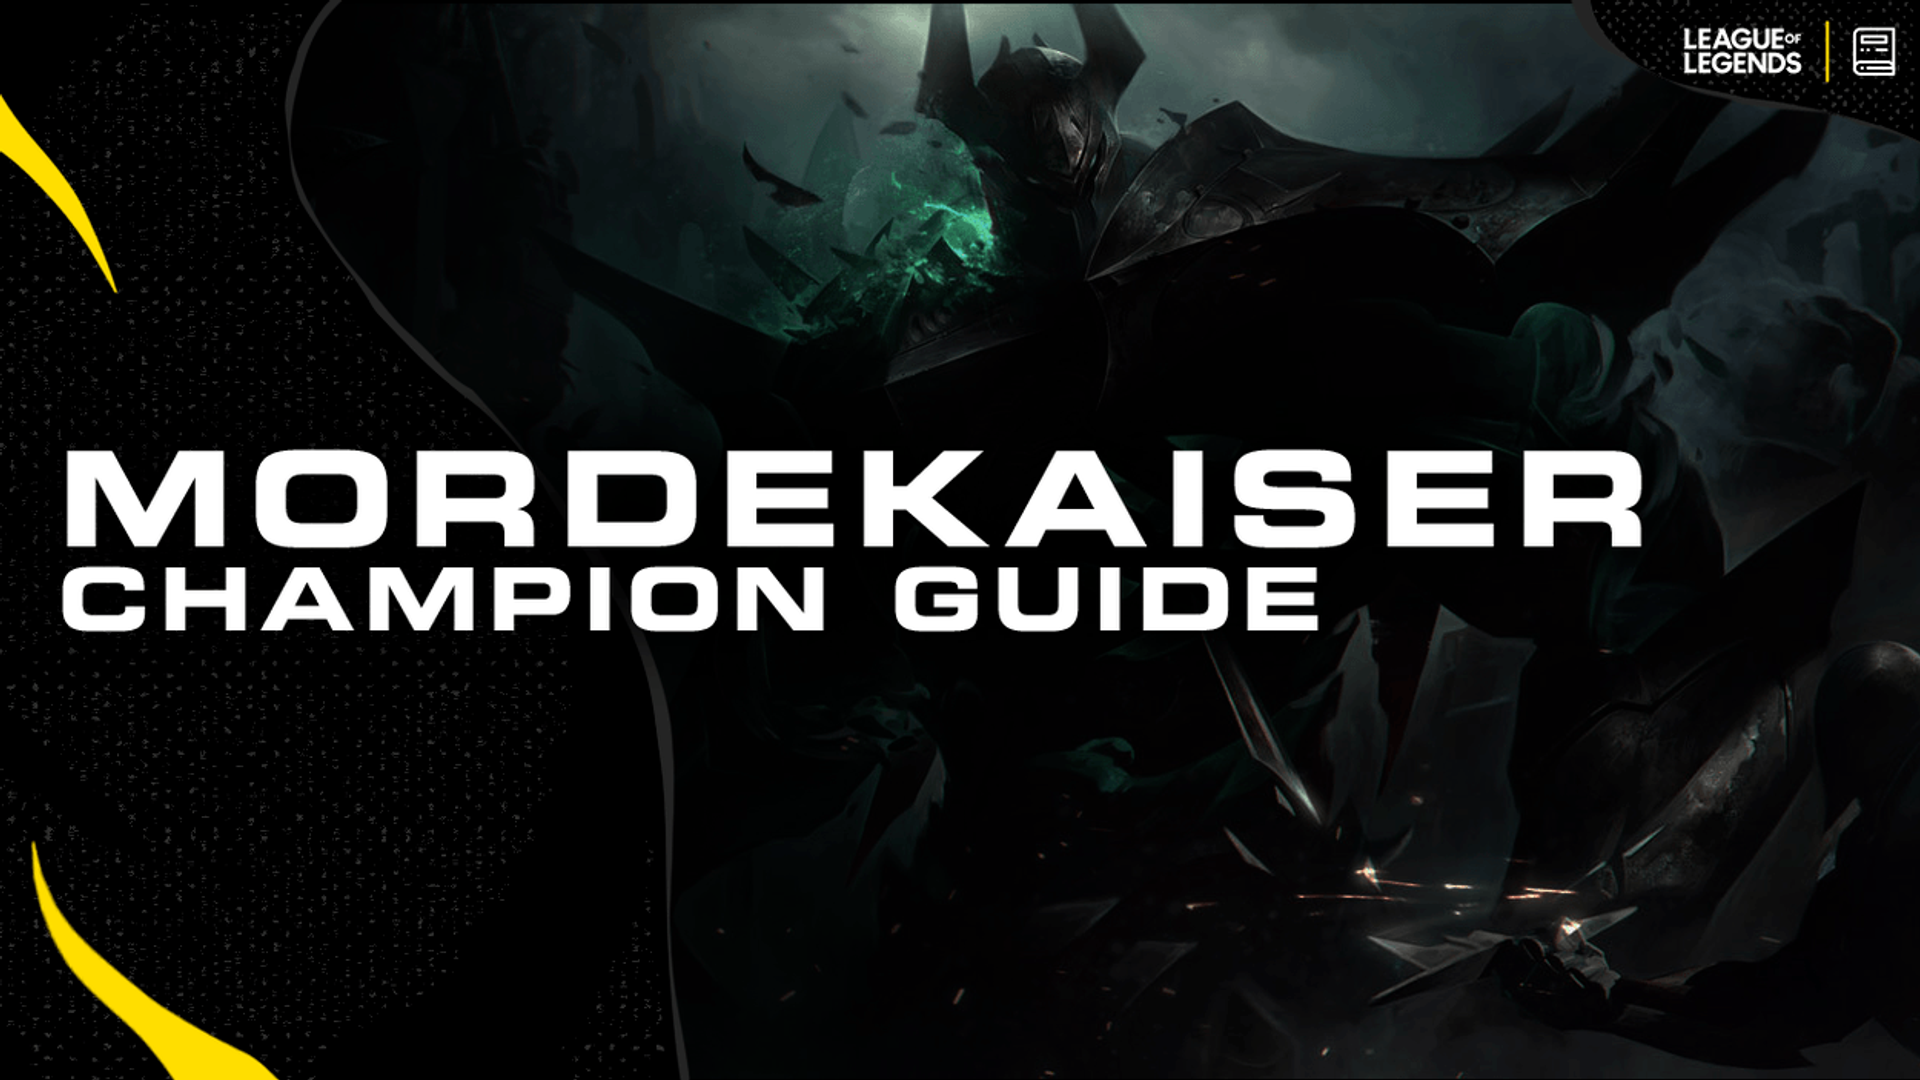 Hunt the opposition with our revamped Revenant Guide